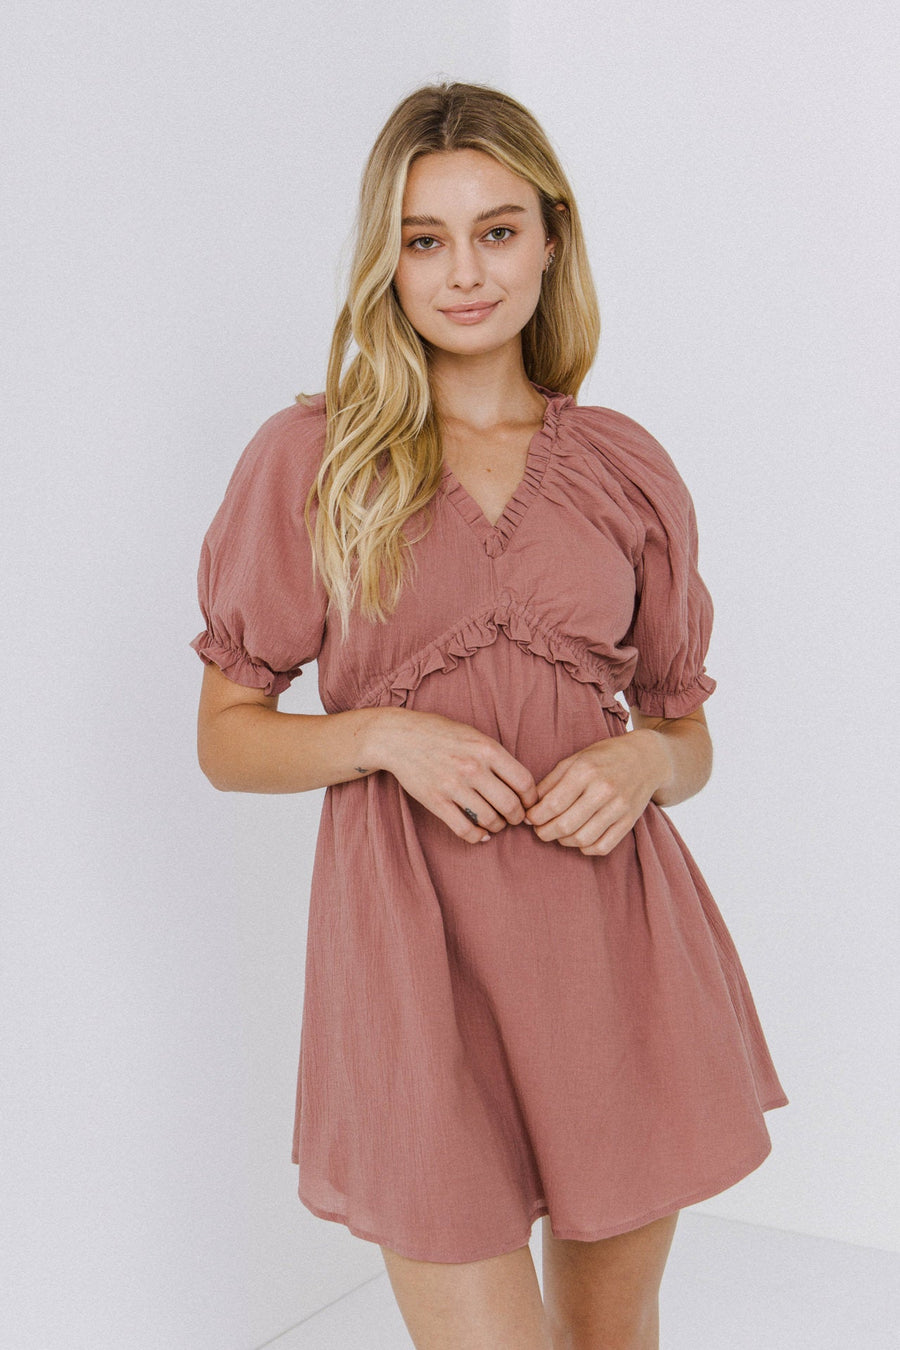 FREE THE ROSES-Ruffle V-Neck Babydoll Dress-DRESSES available at Objectrare